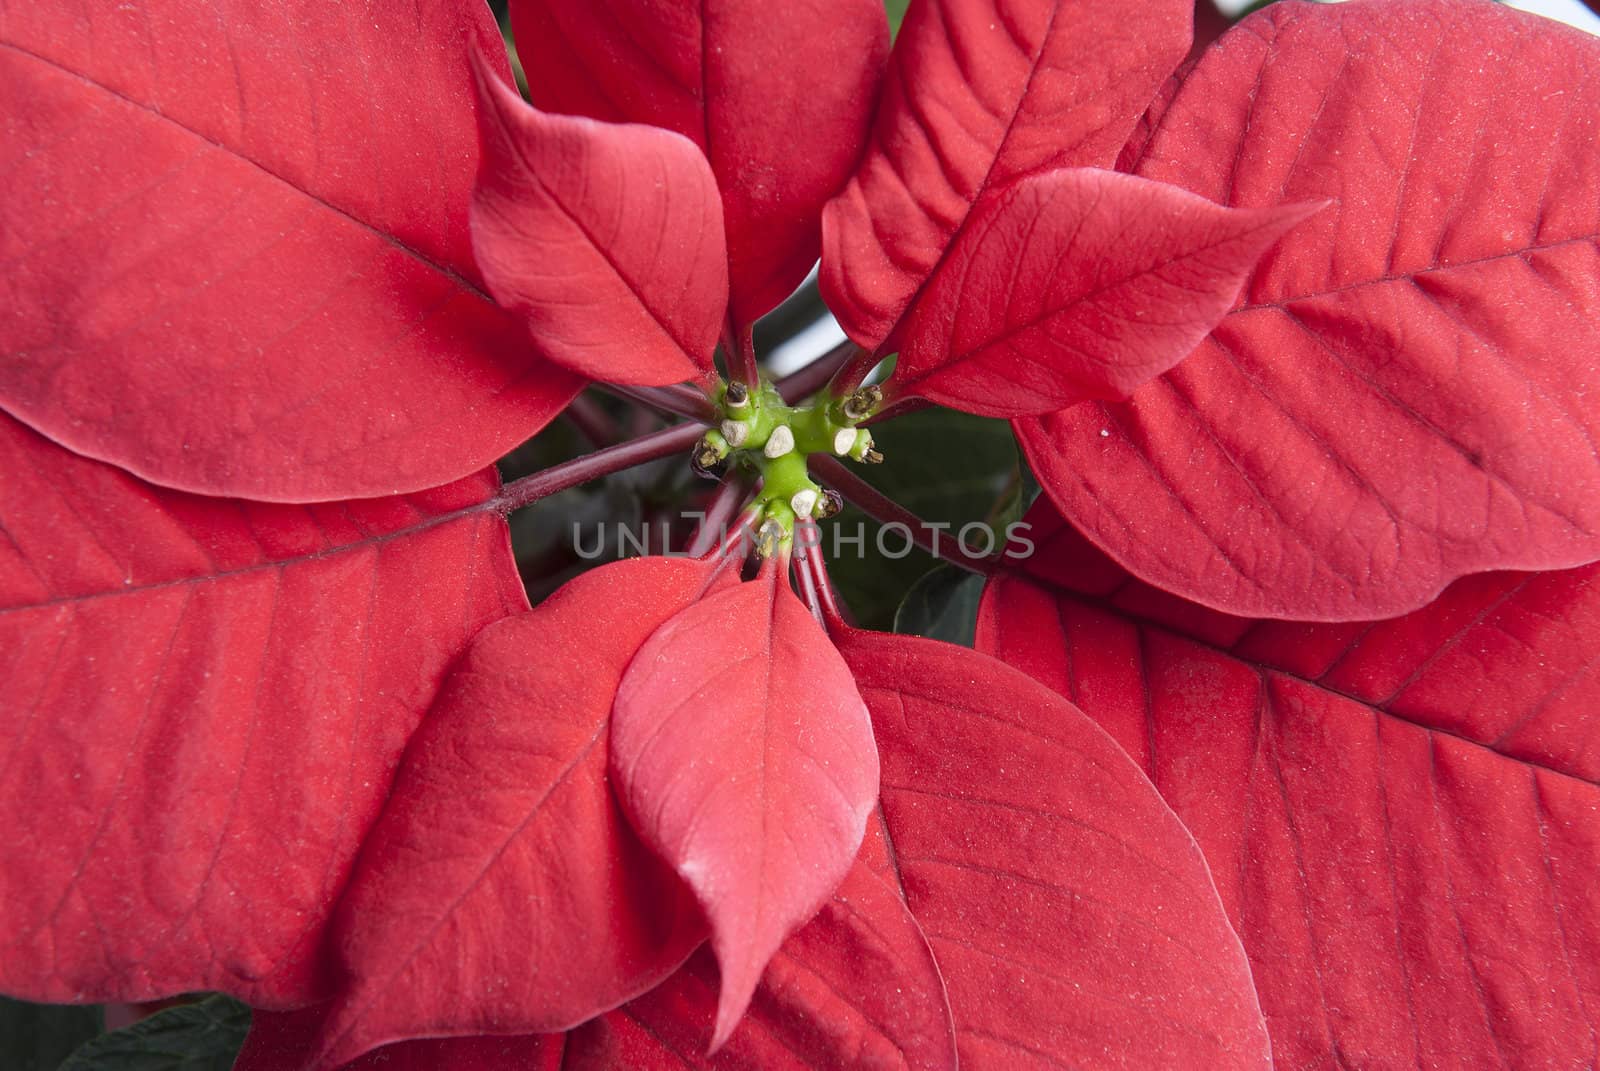 Closeup of the typical red leaves of a poinsettia.